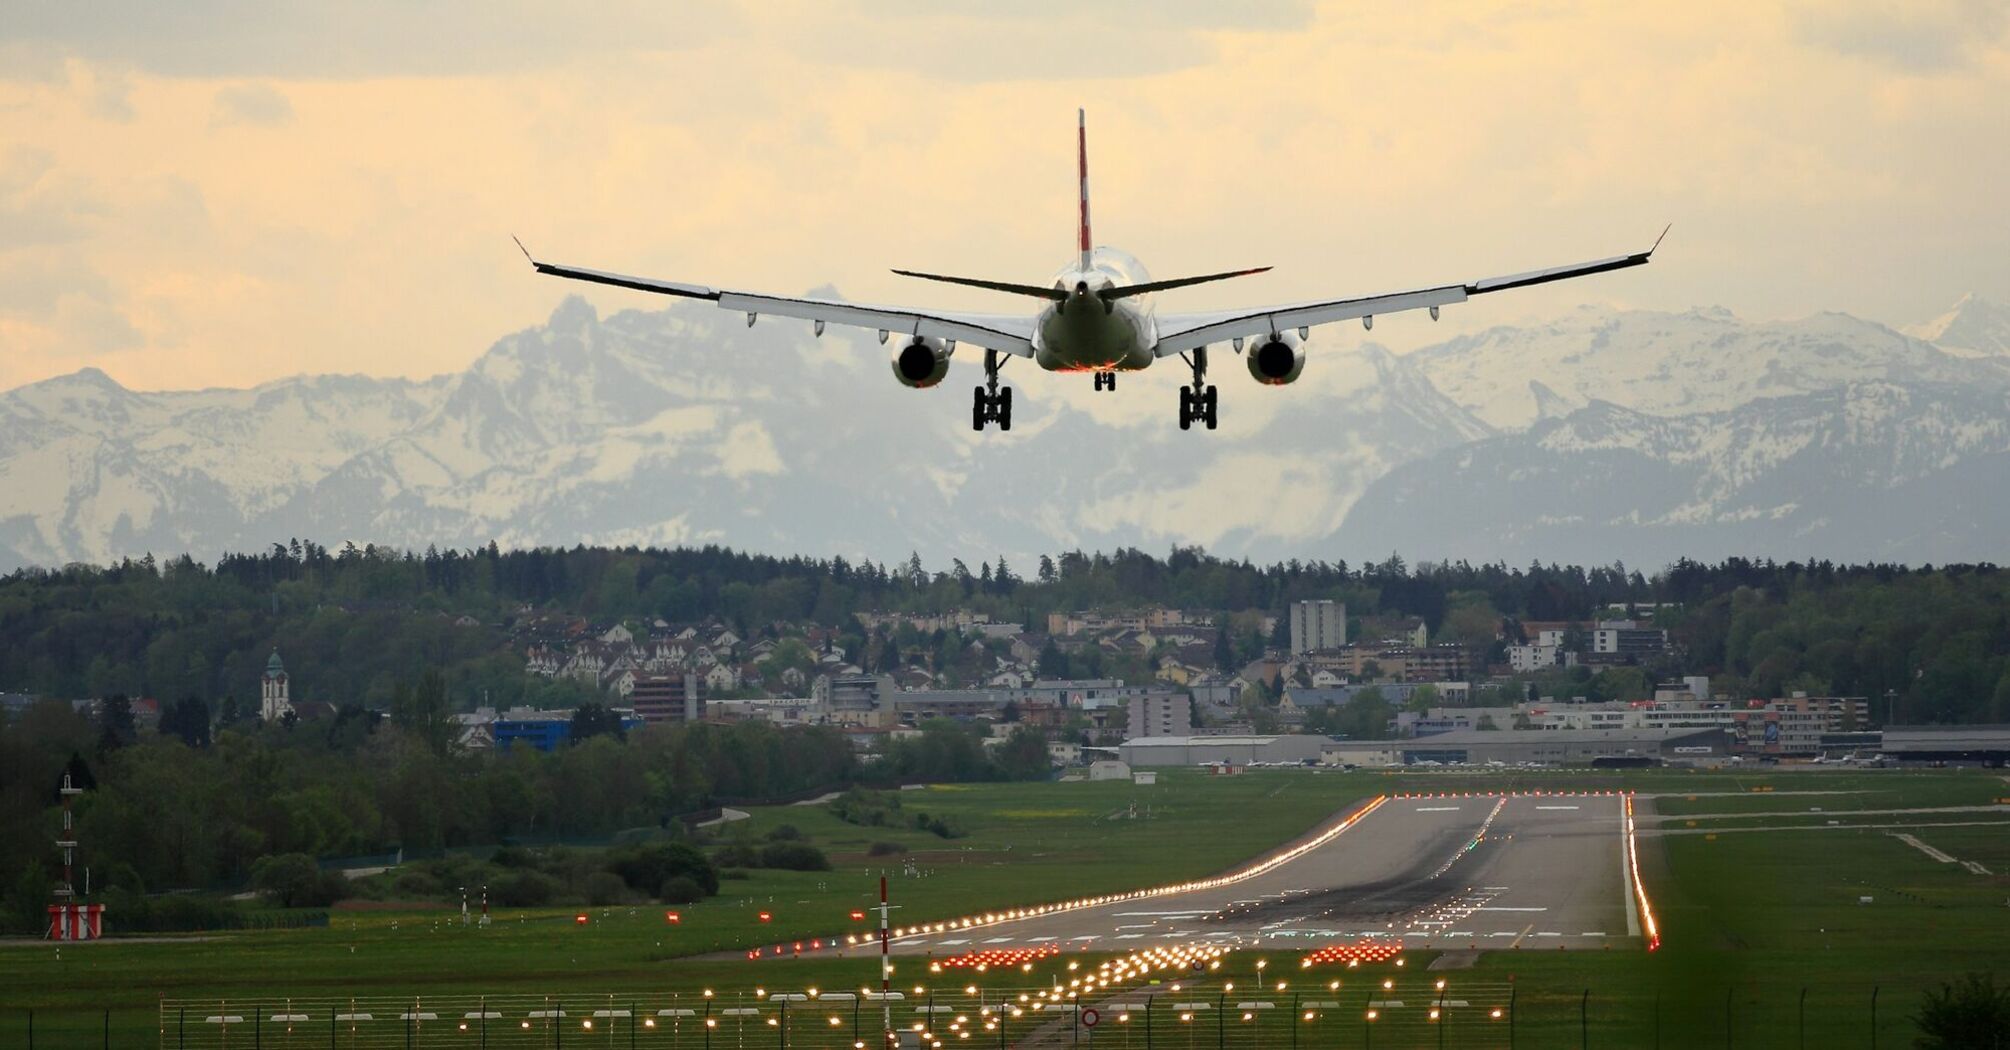 An airplane landing on a runway with mountains in the background